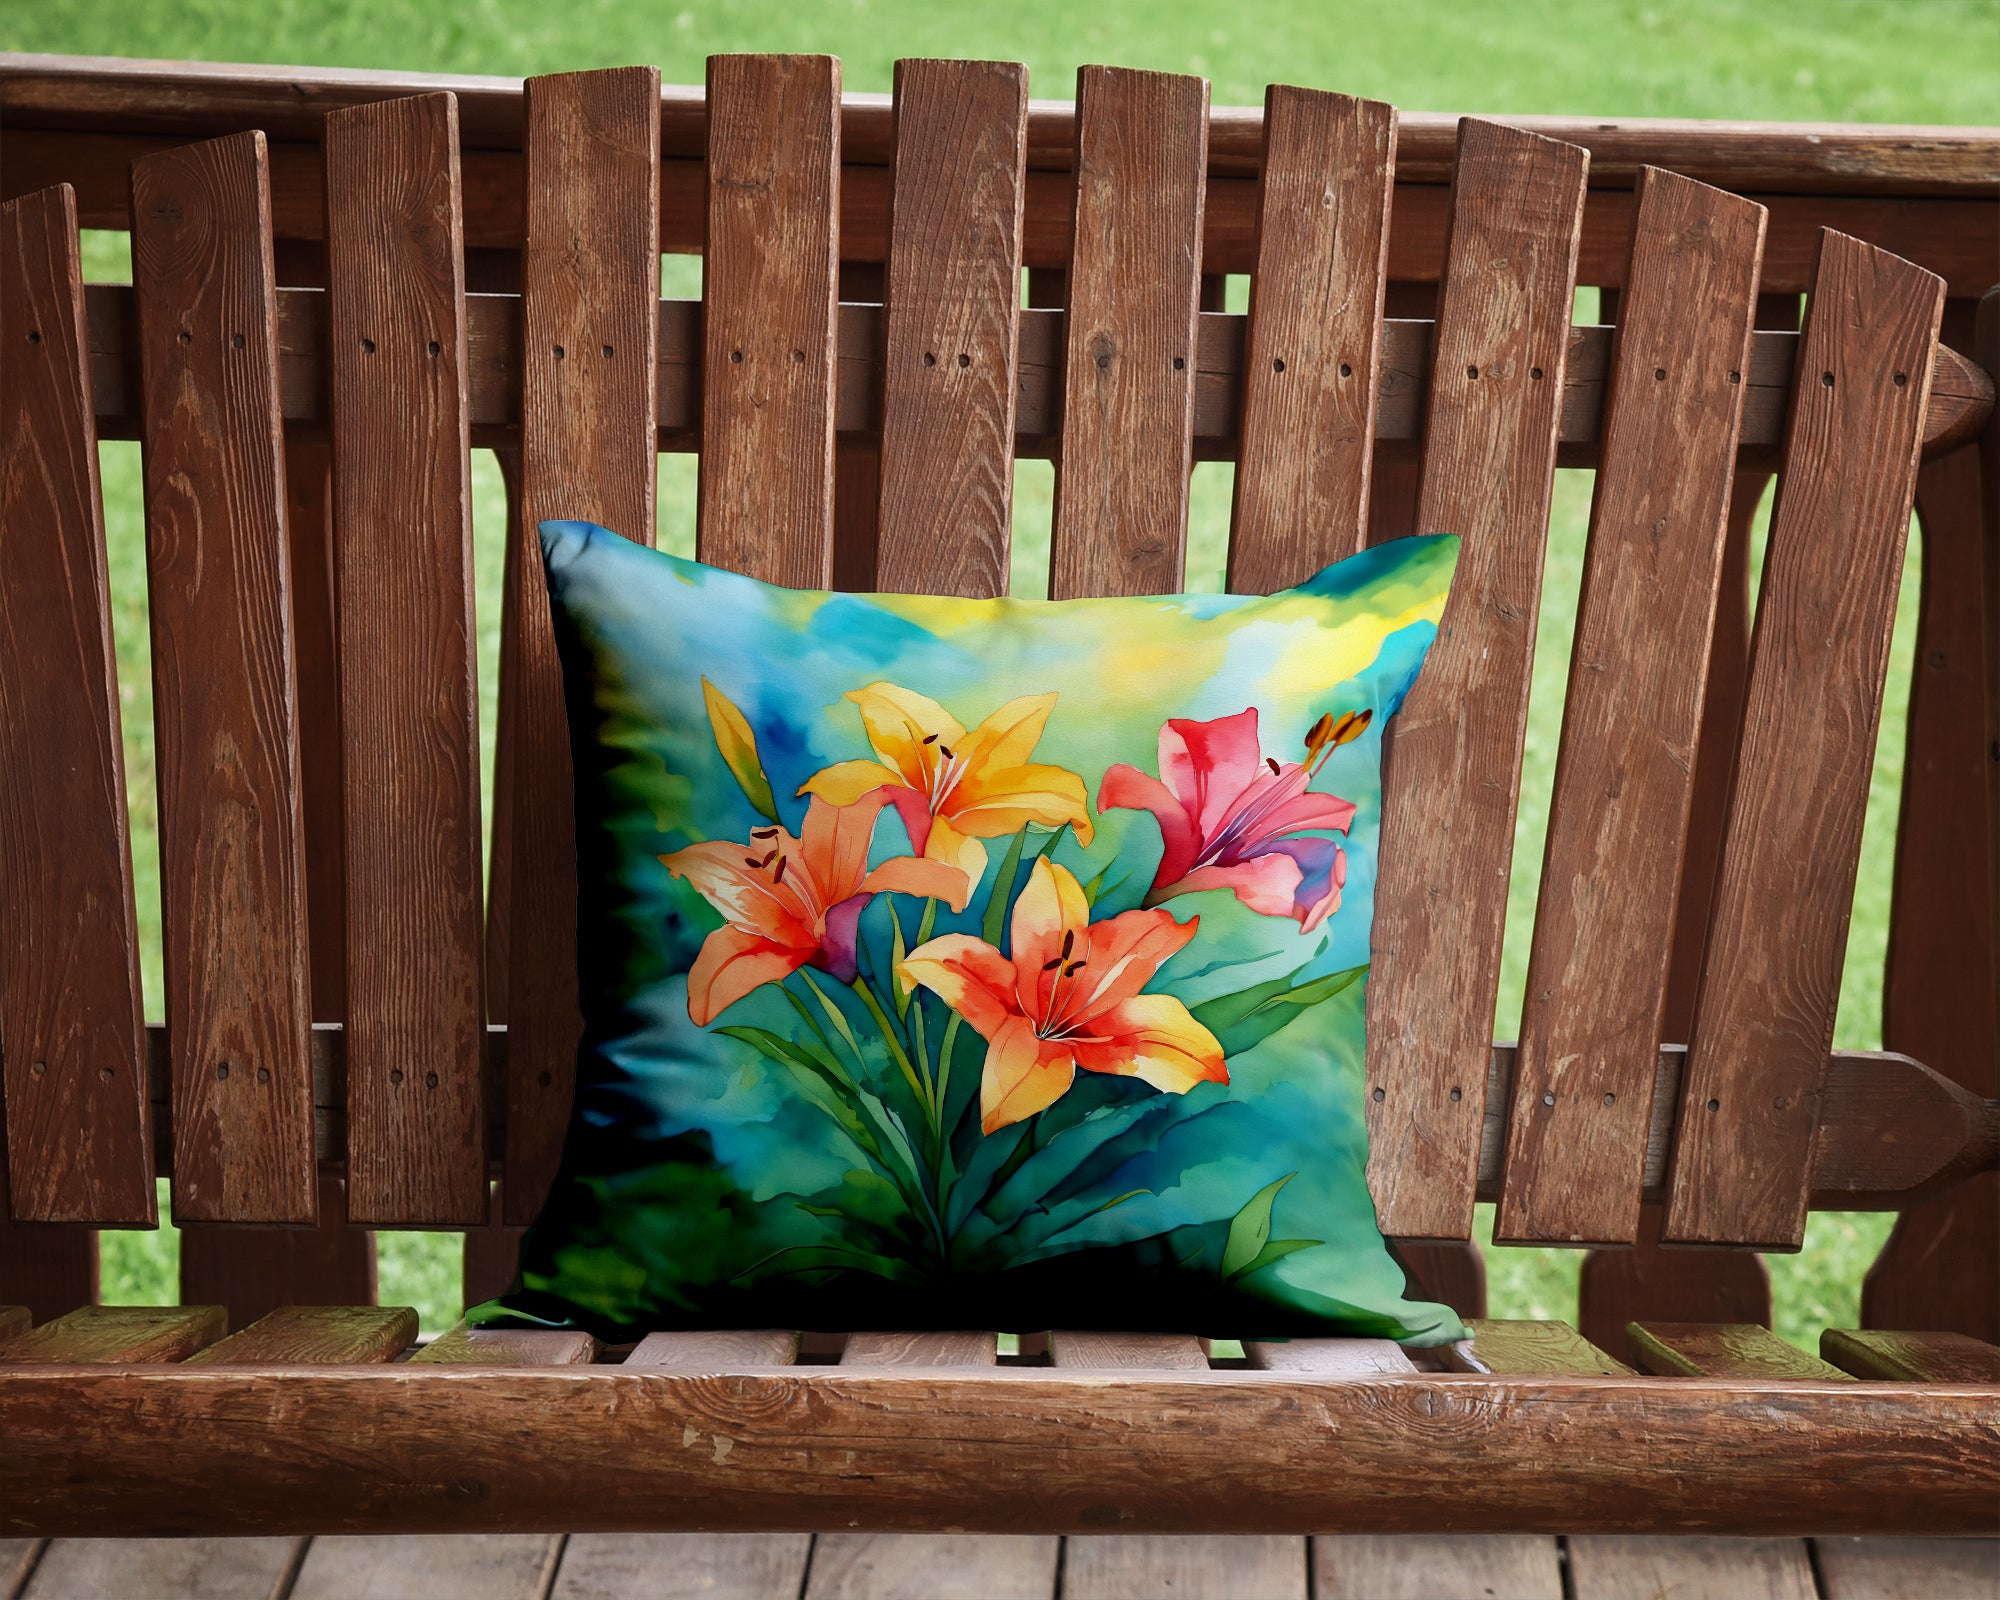 Buy this Lilies in Watercolor Throw Pillow